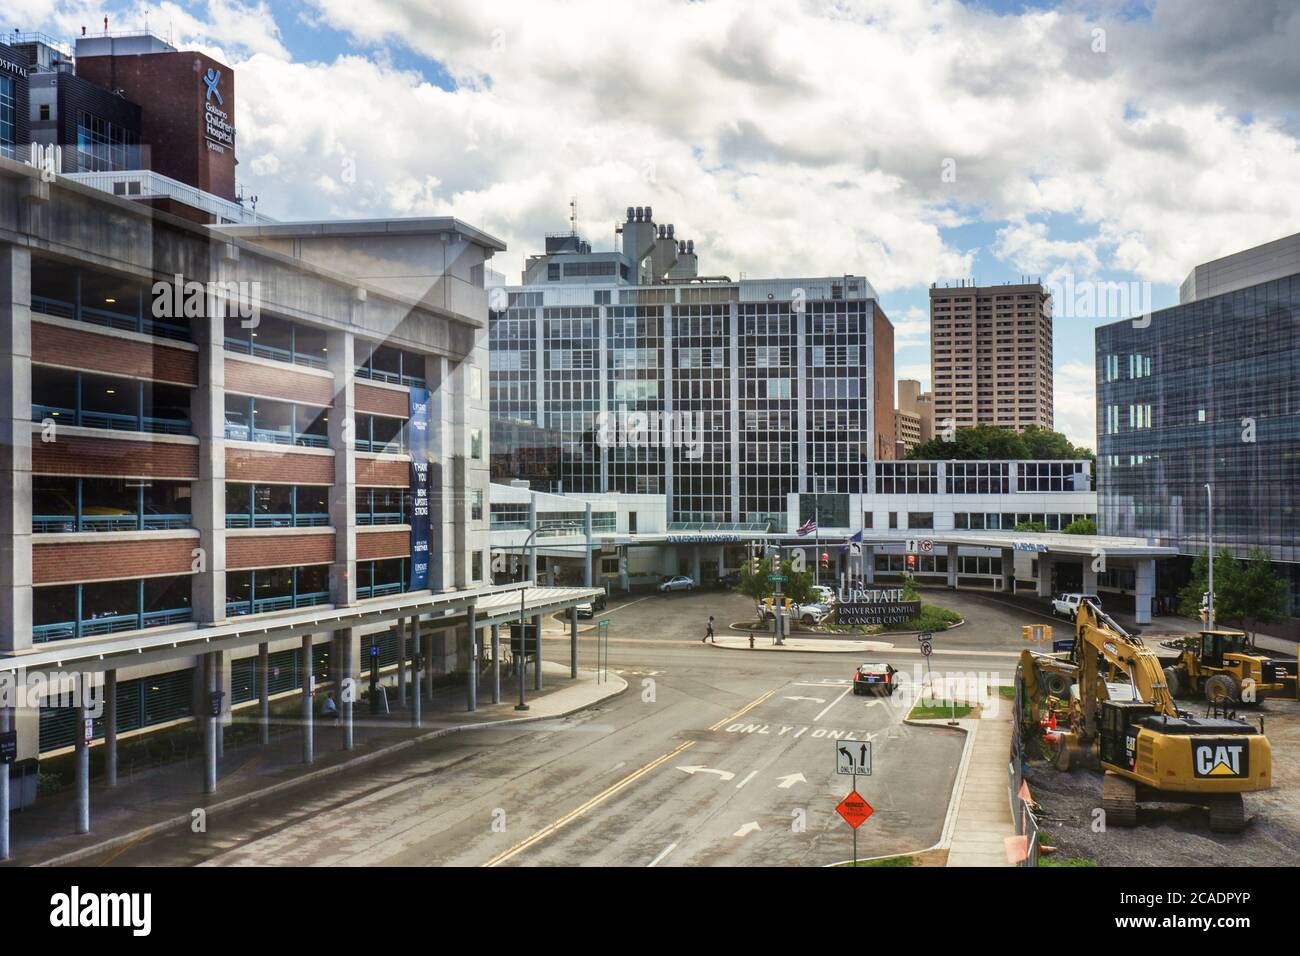 Syracuse, New York, USA. August 2, 2020. View of a construction site on Adams Street in front of Upstate University Medical Center in Syracuse, NY Stock Photo